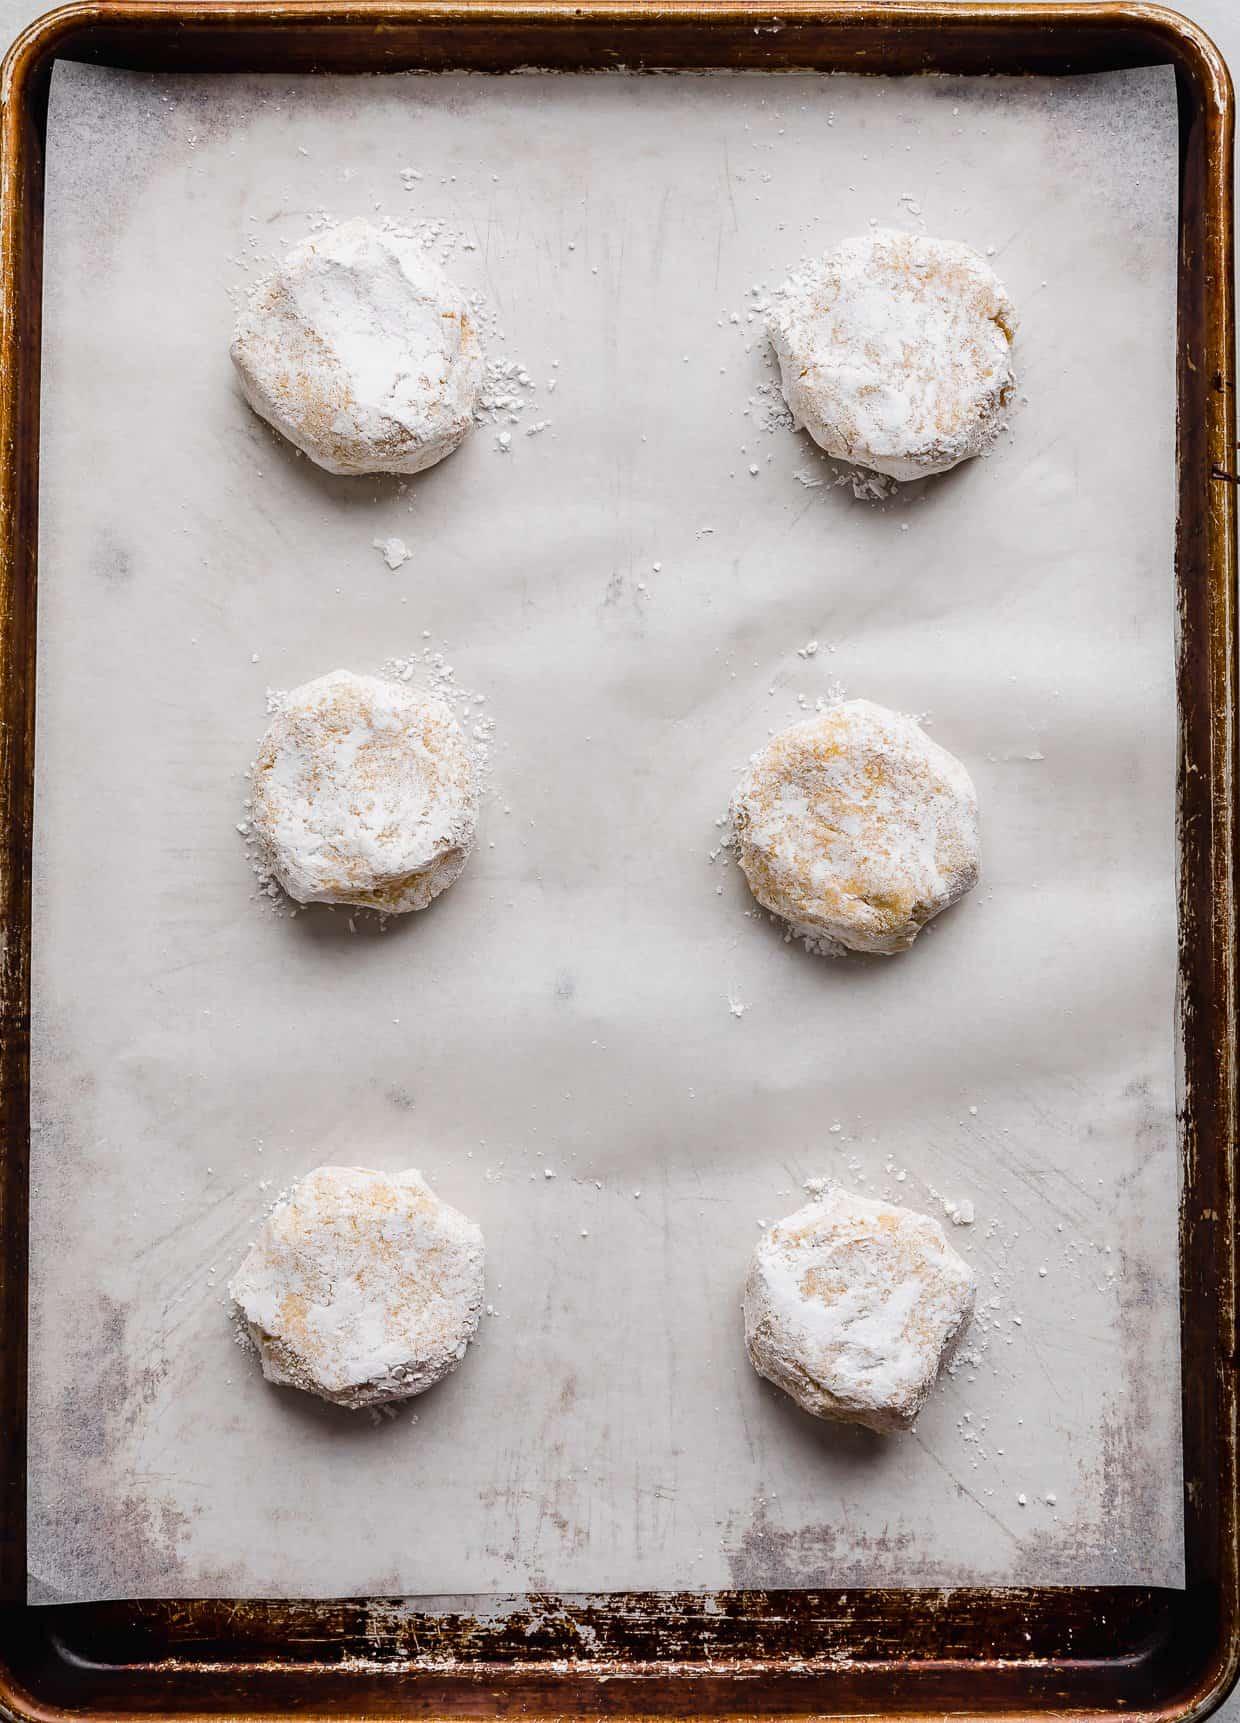 Six lemon crinkle cookie dough balls rolled in powdered sugar on a white parchment lined baking sheet.